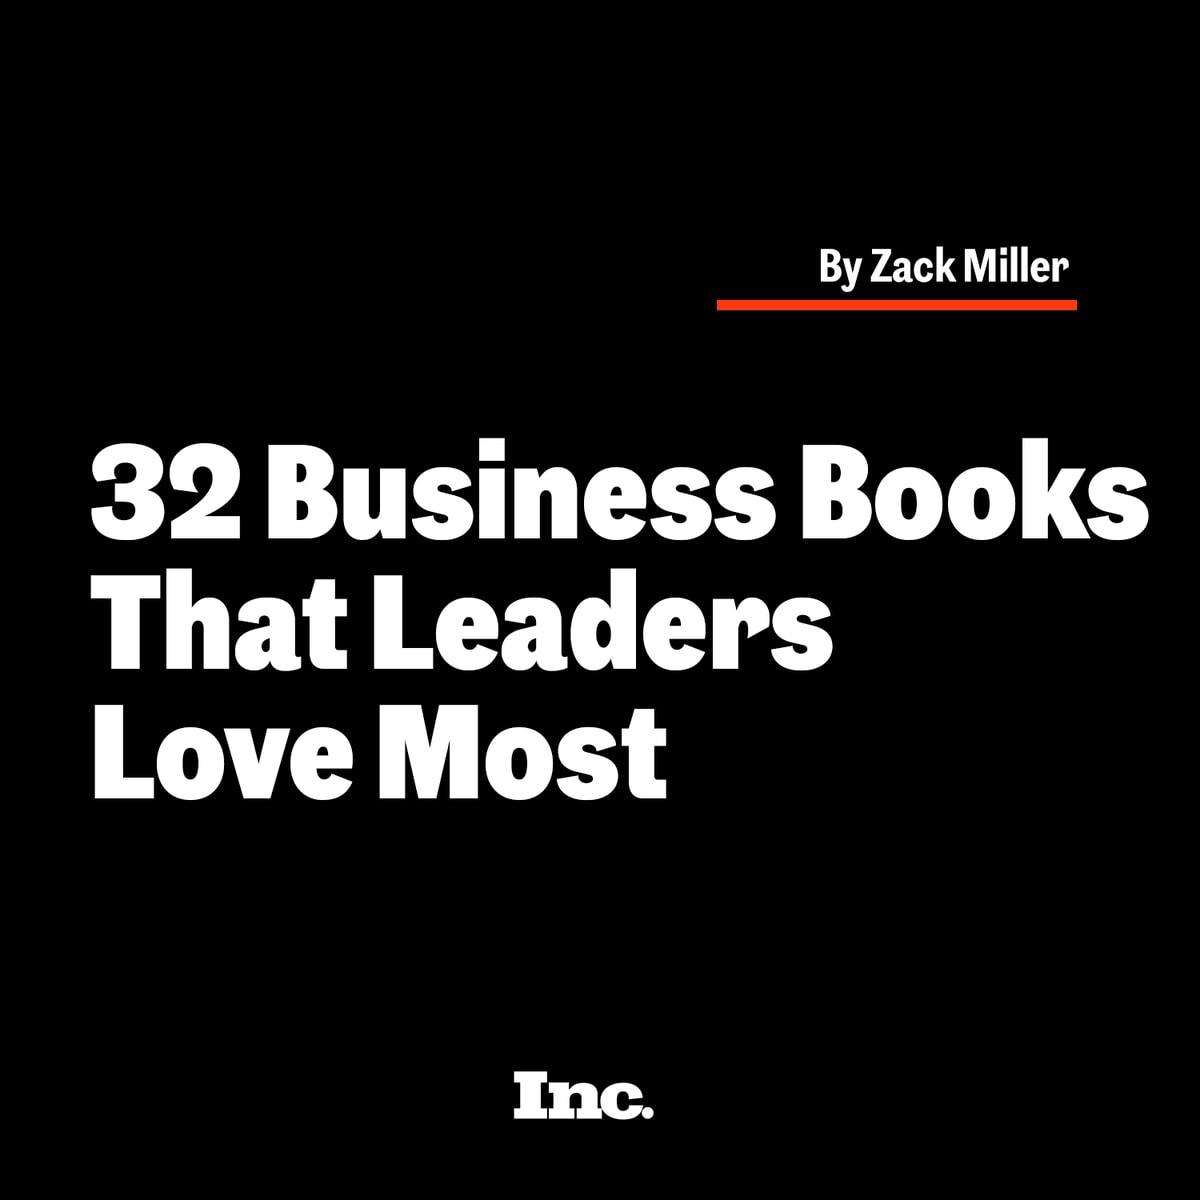 Business books that you will definitely want to add to your reading list.